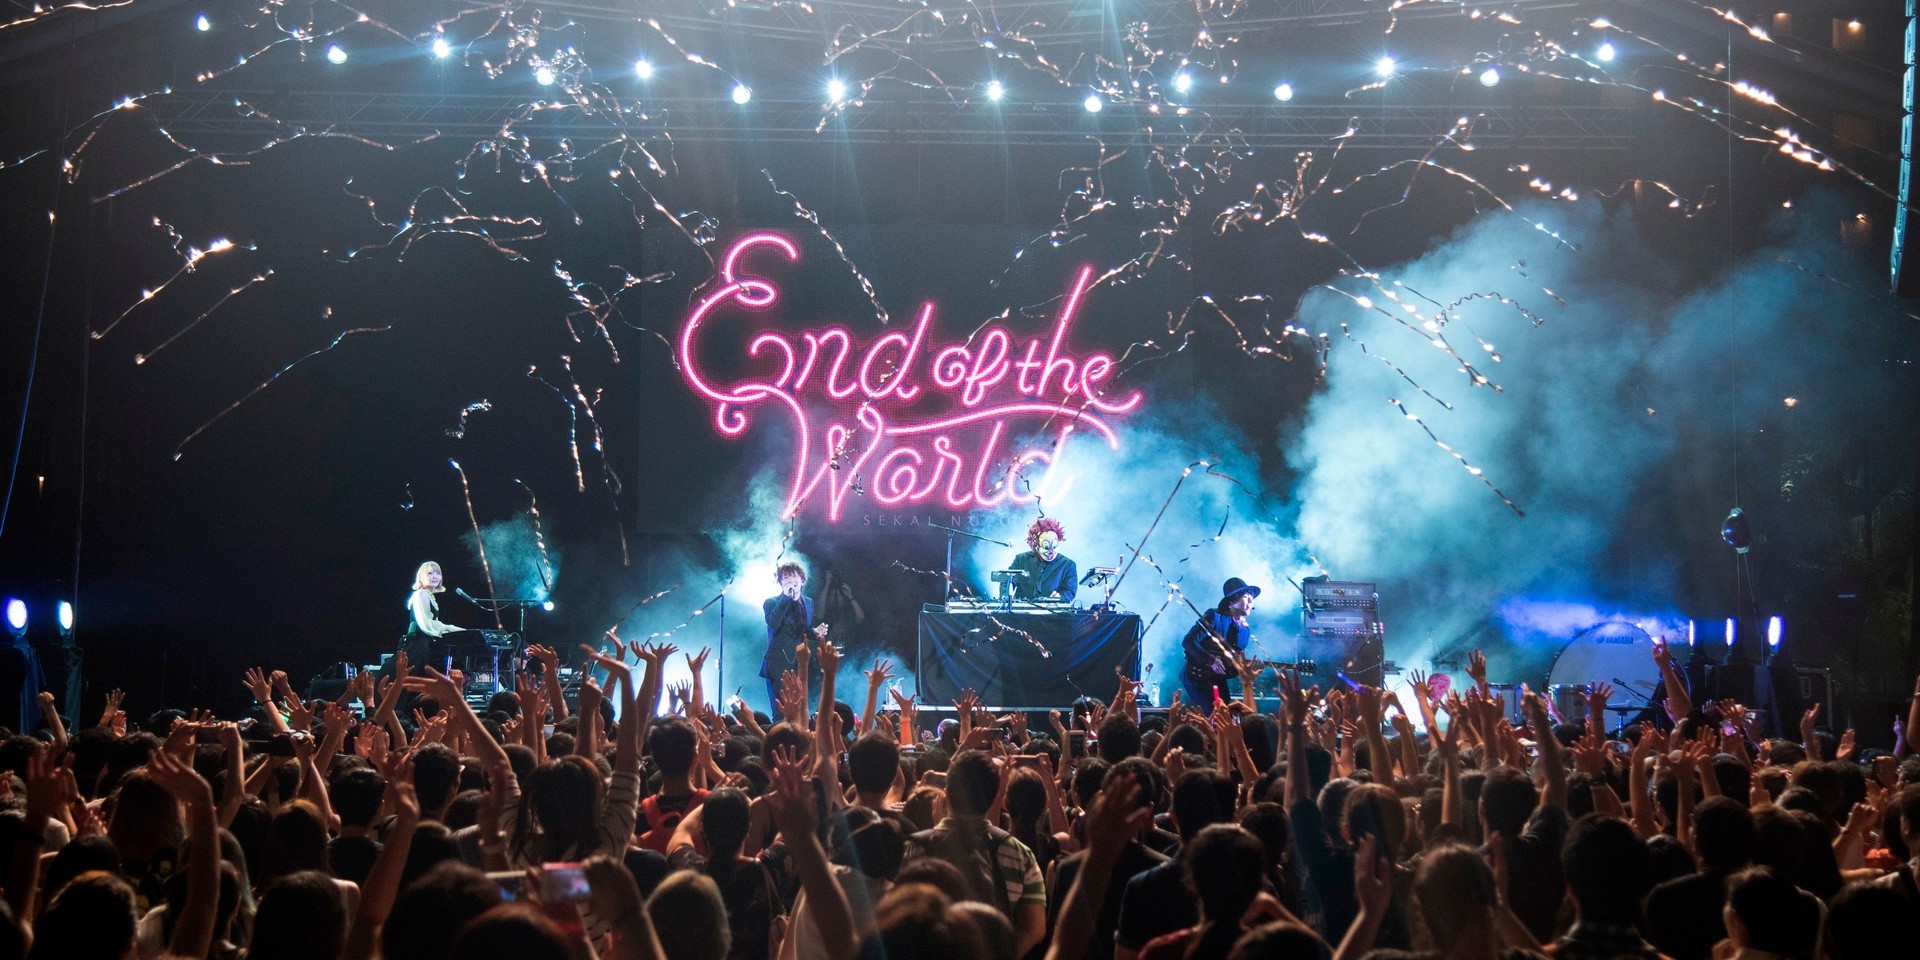 PHOTO GALLERY: SEKAI NO OWARI hosts a spirited End of the World party in Singapore